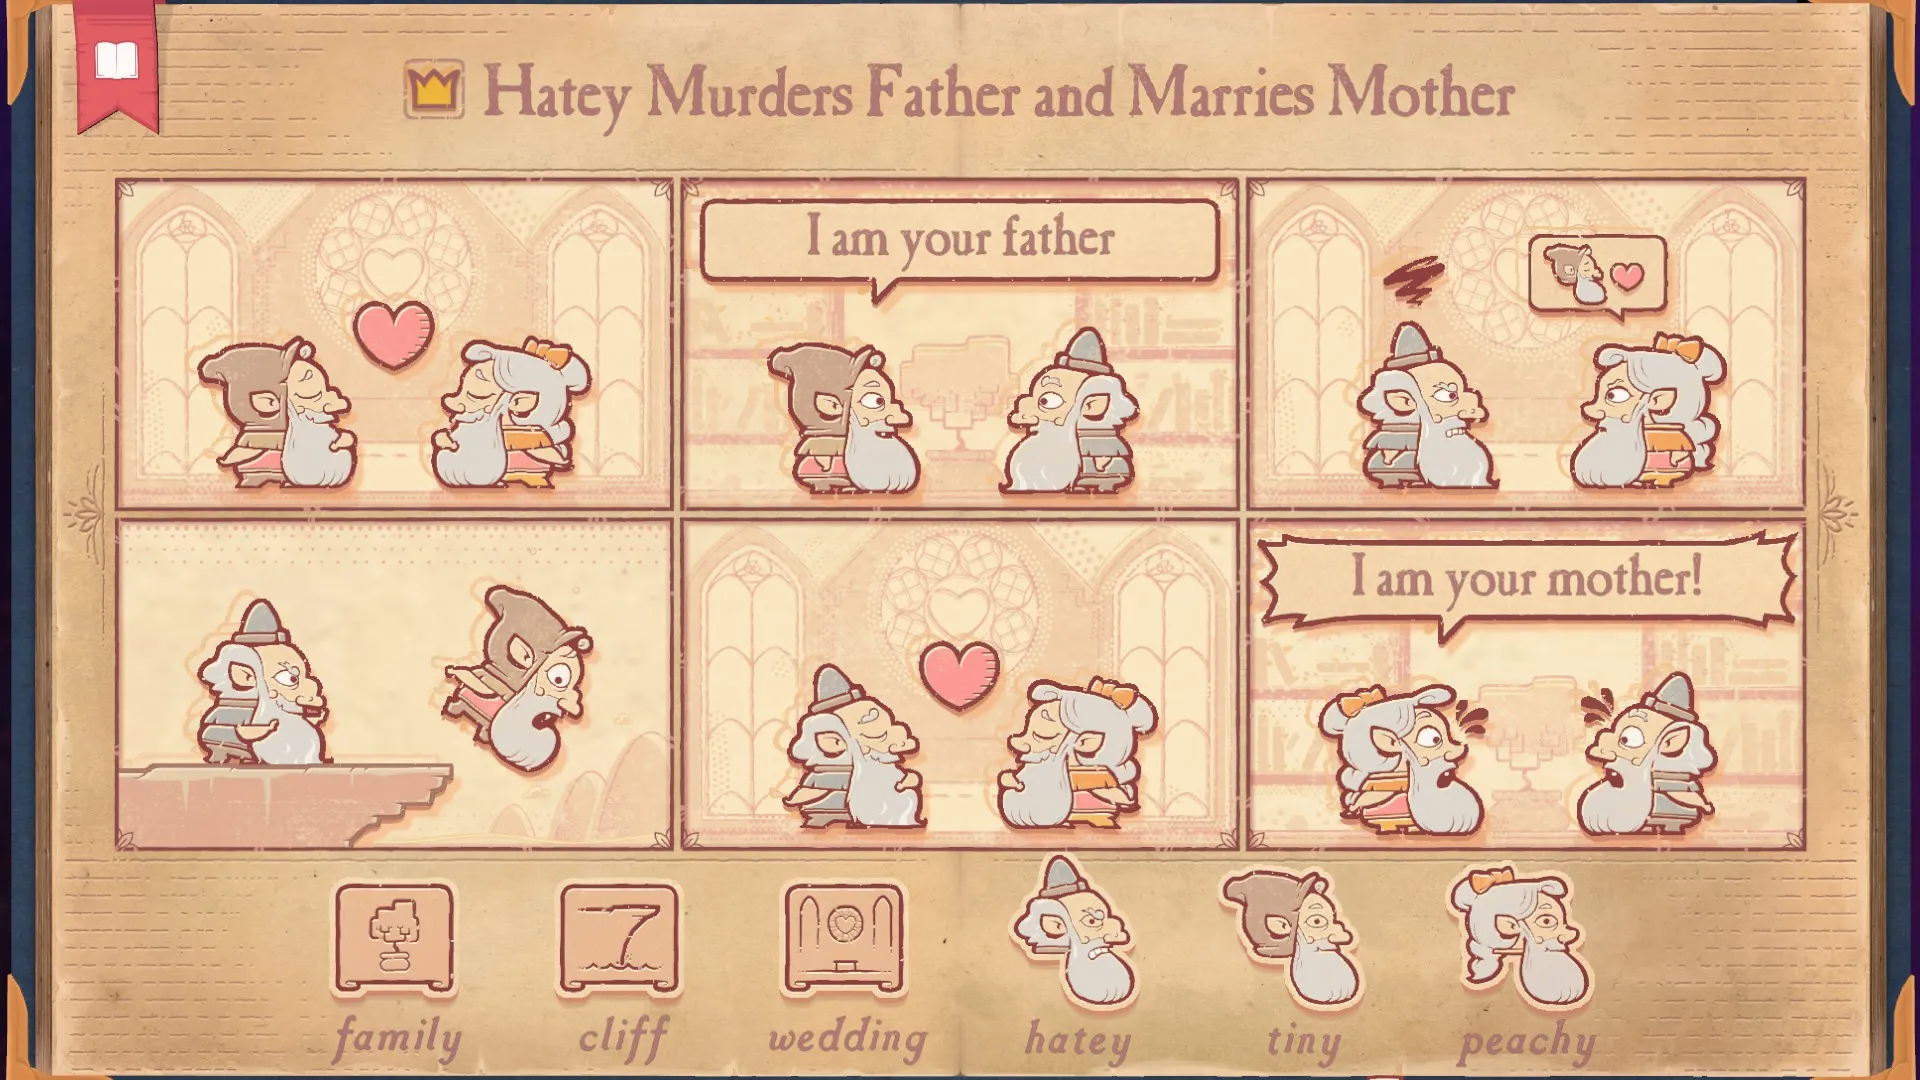 The solution for the Oedipus section of Storyteller, showing Hatey murdering his father then marrying his mother.